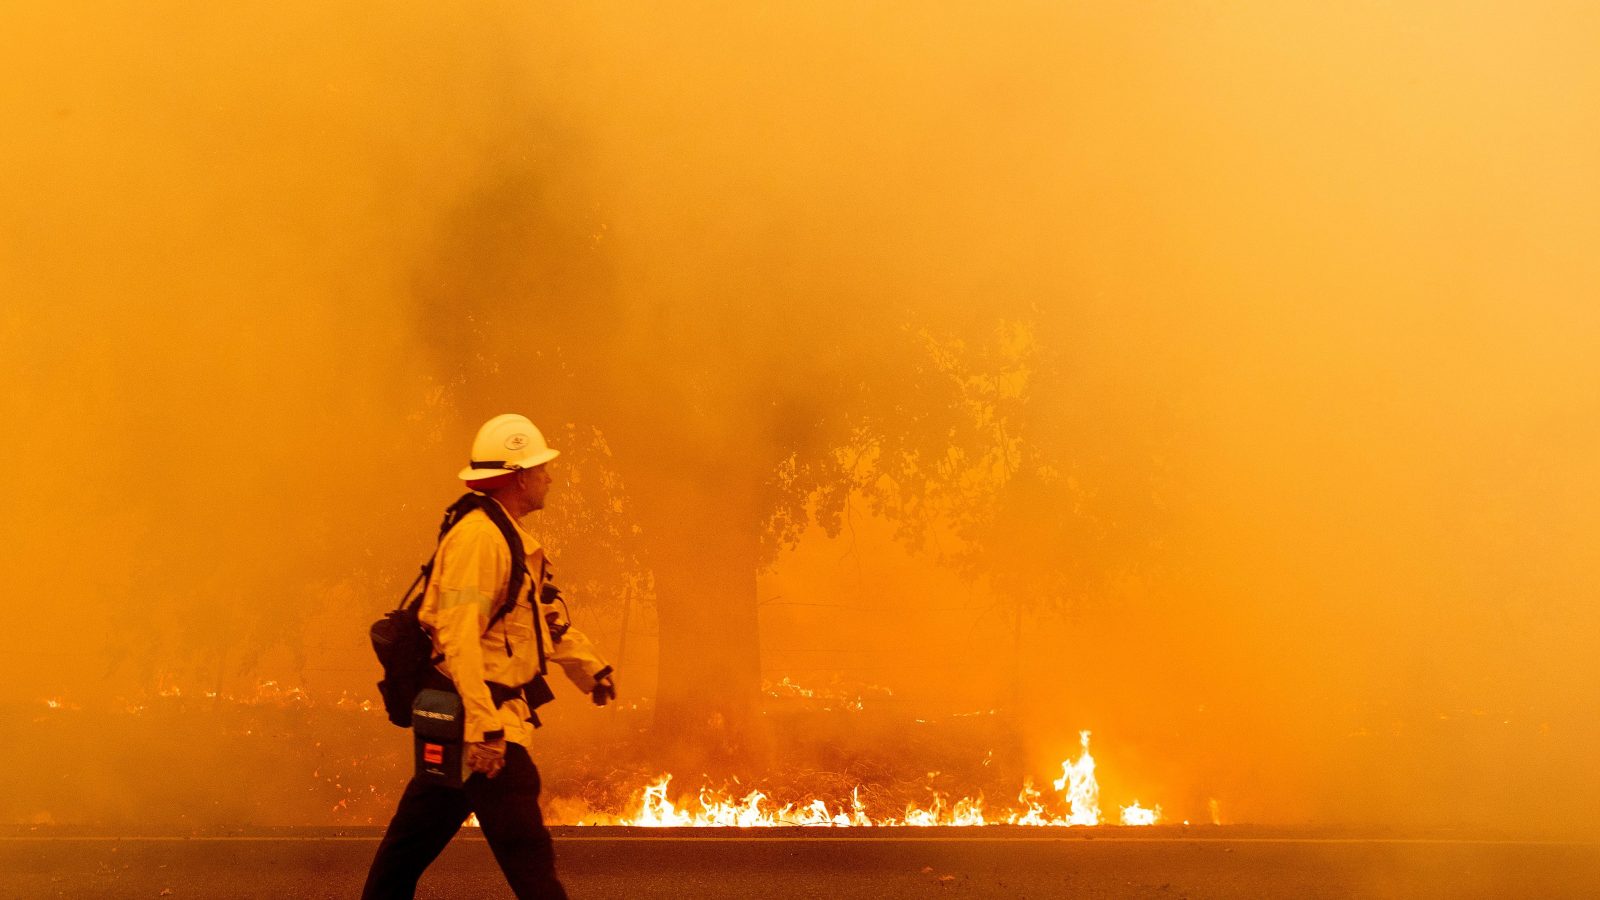 A Pacific Gas and Electric firefighter walks down a road as flames approach in Fairfield, California during the LNU Lightning Complex fire on August 19, 2020.